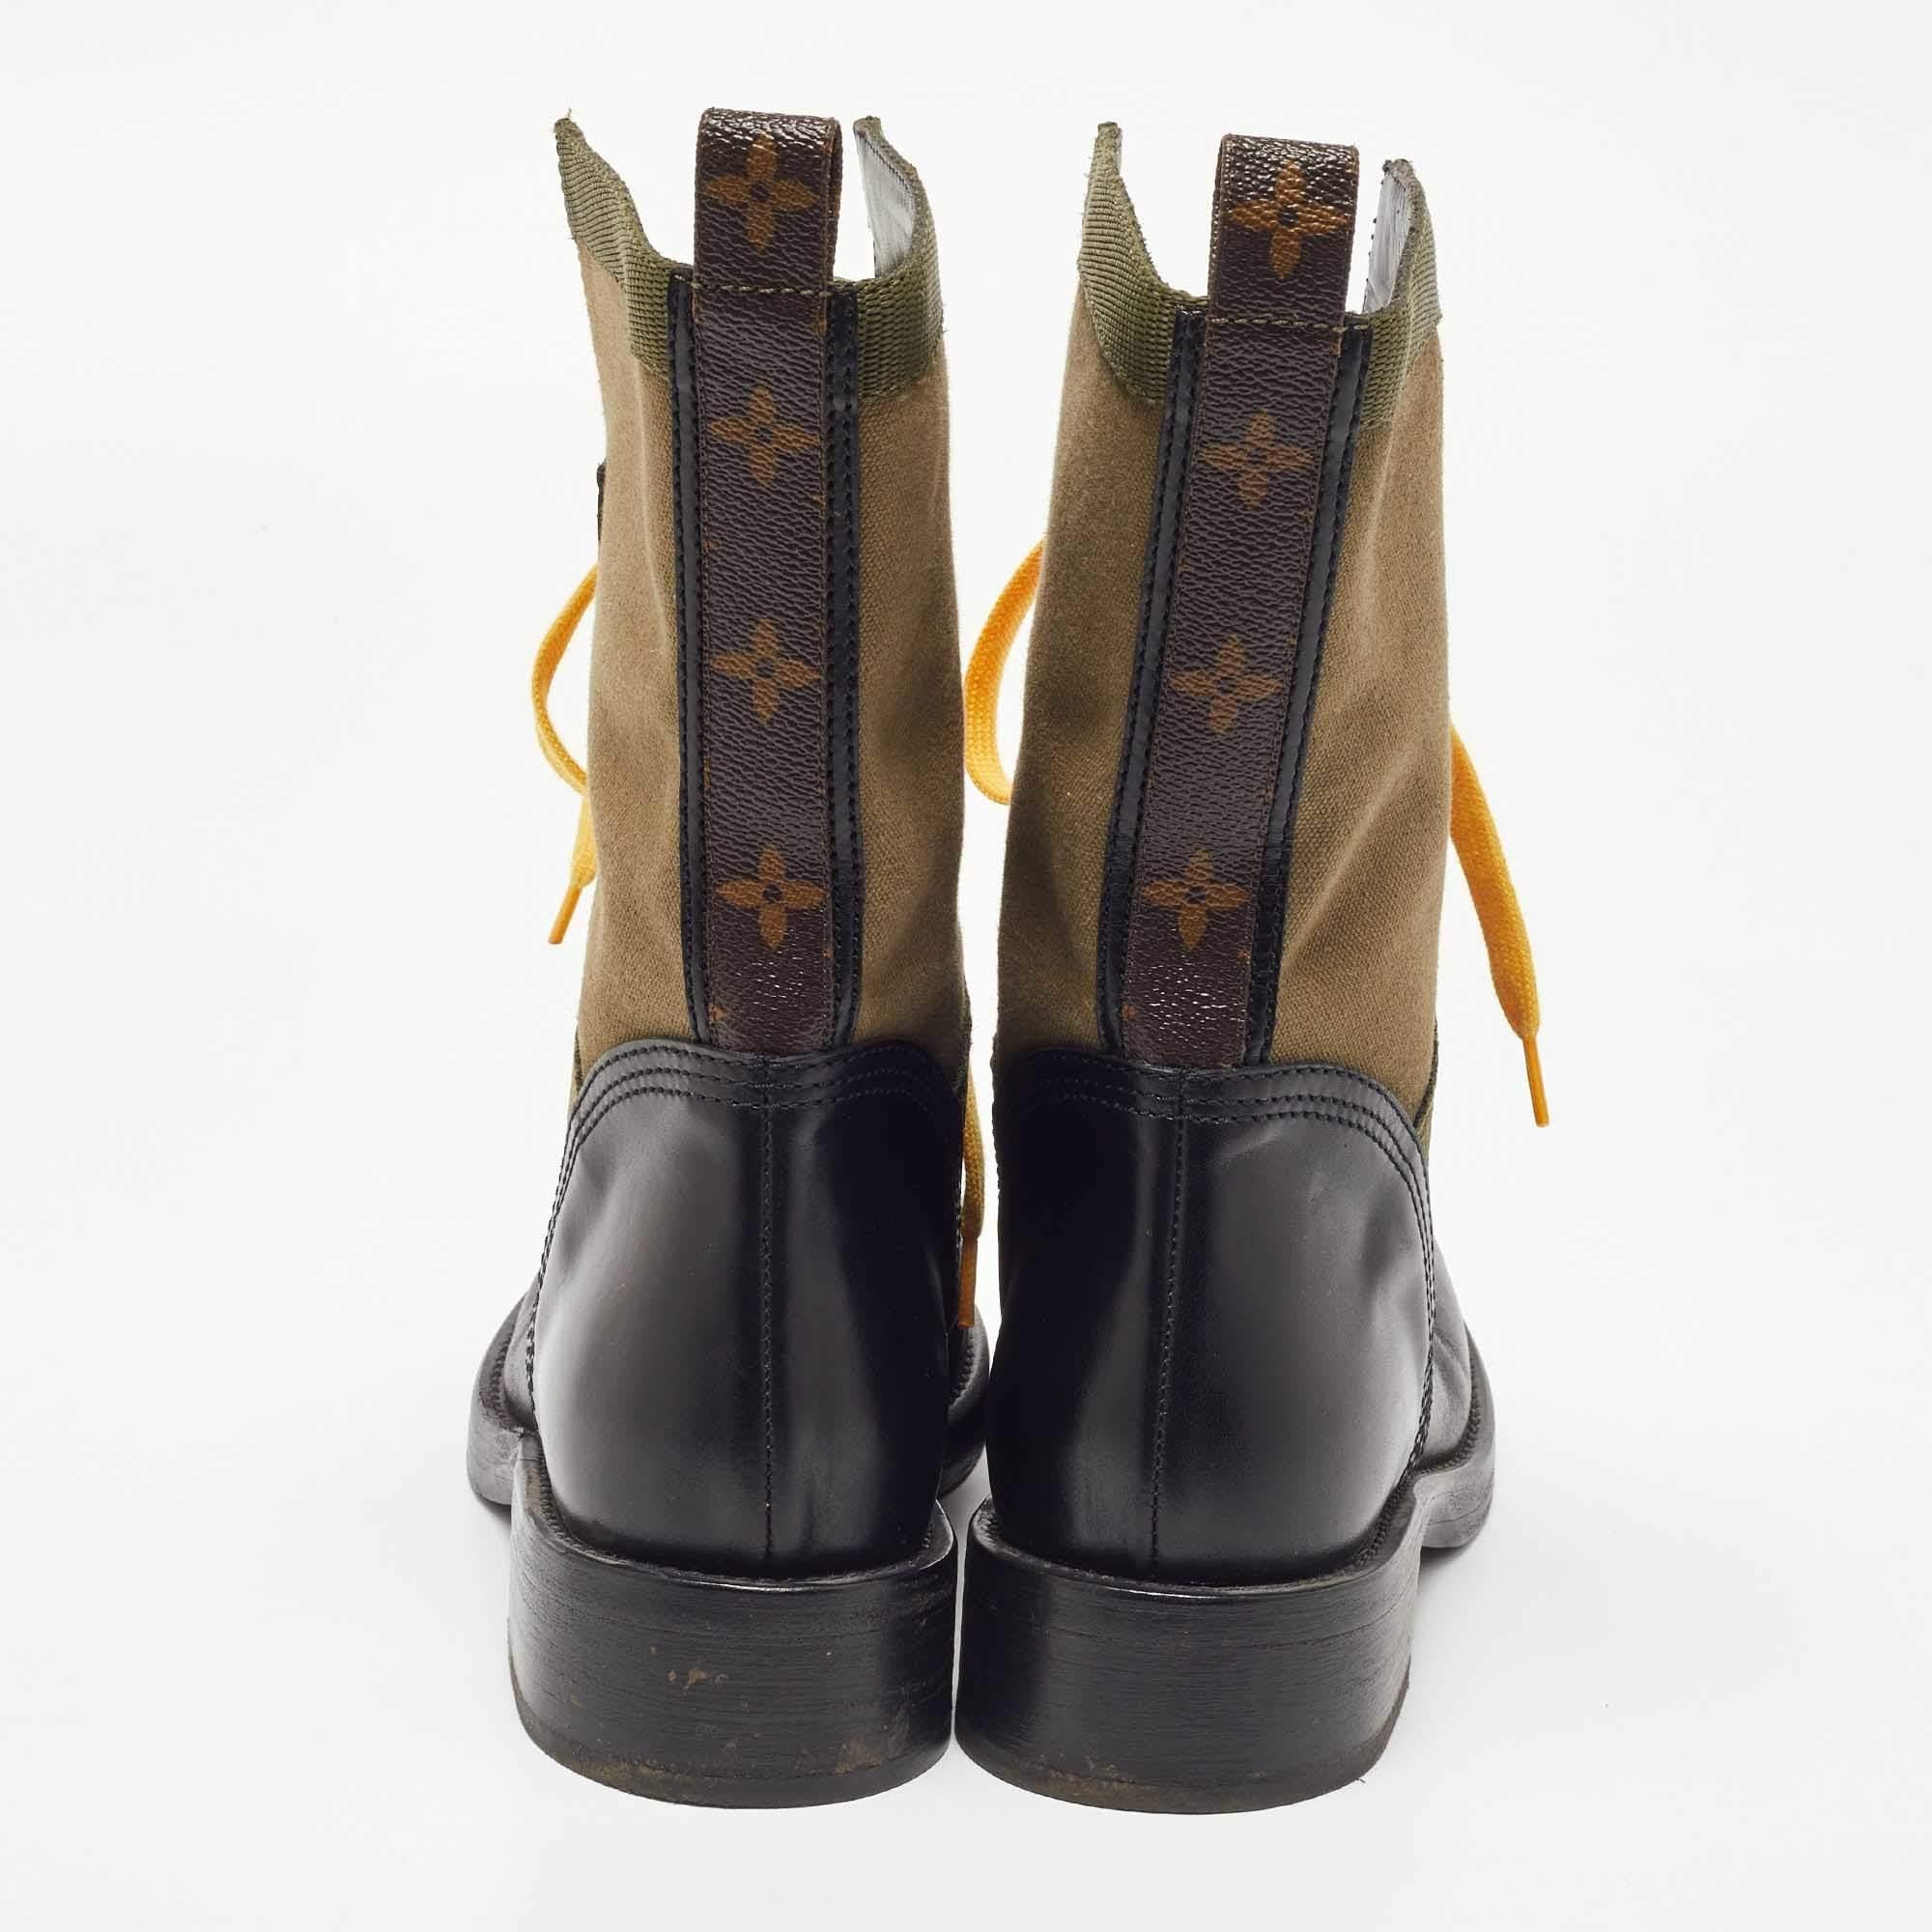 Louis Vuitton Green/Black Canvas and Leather Midcalf Boots Size 38.5 In Excellent Condition For Sale In Dubai, Al Qouz 2